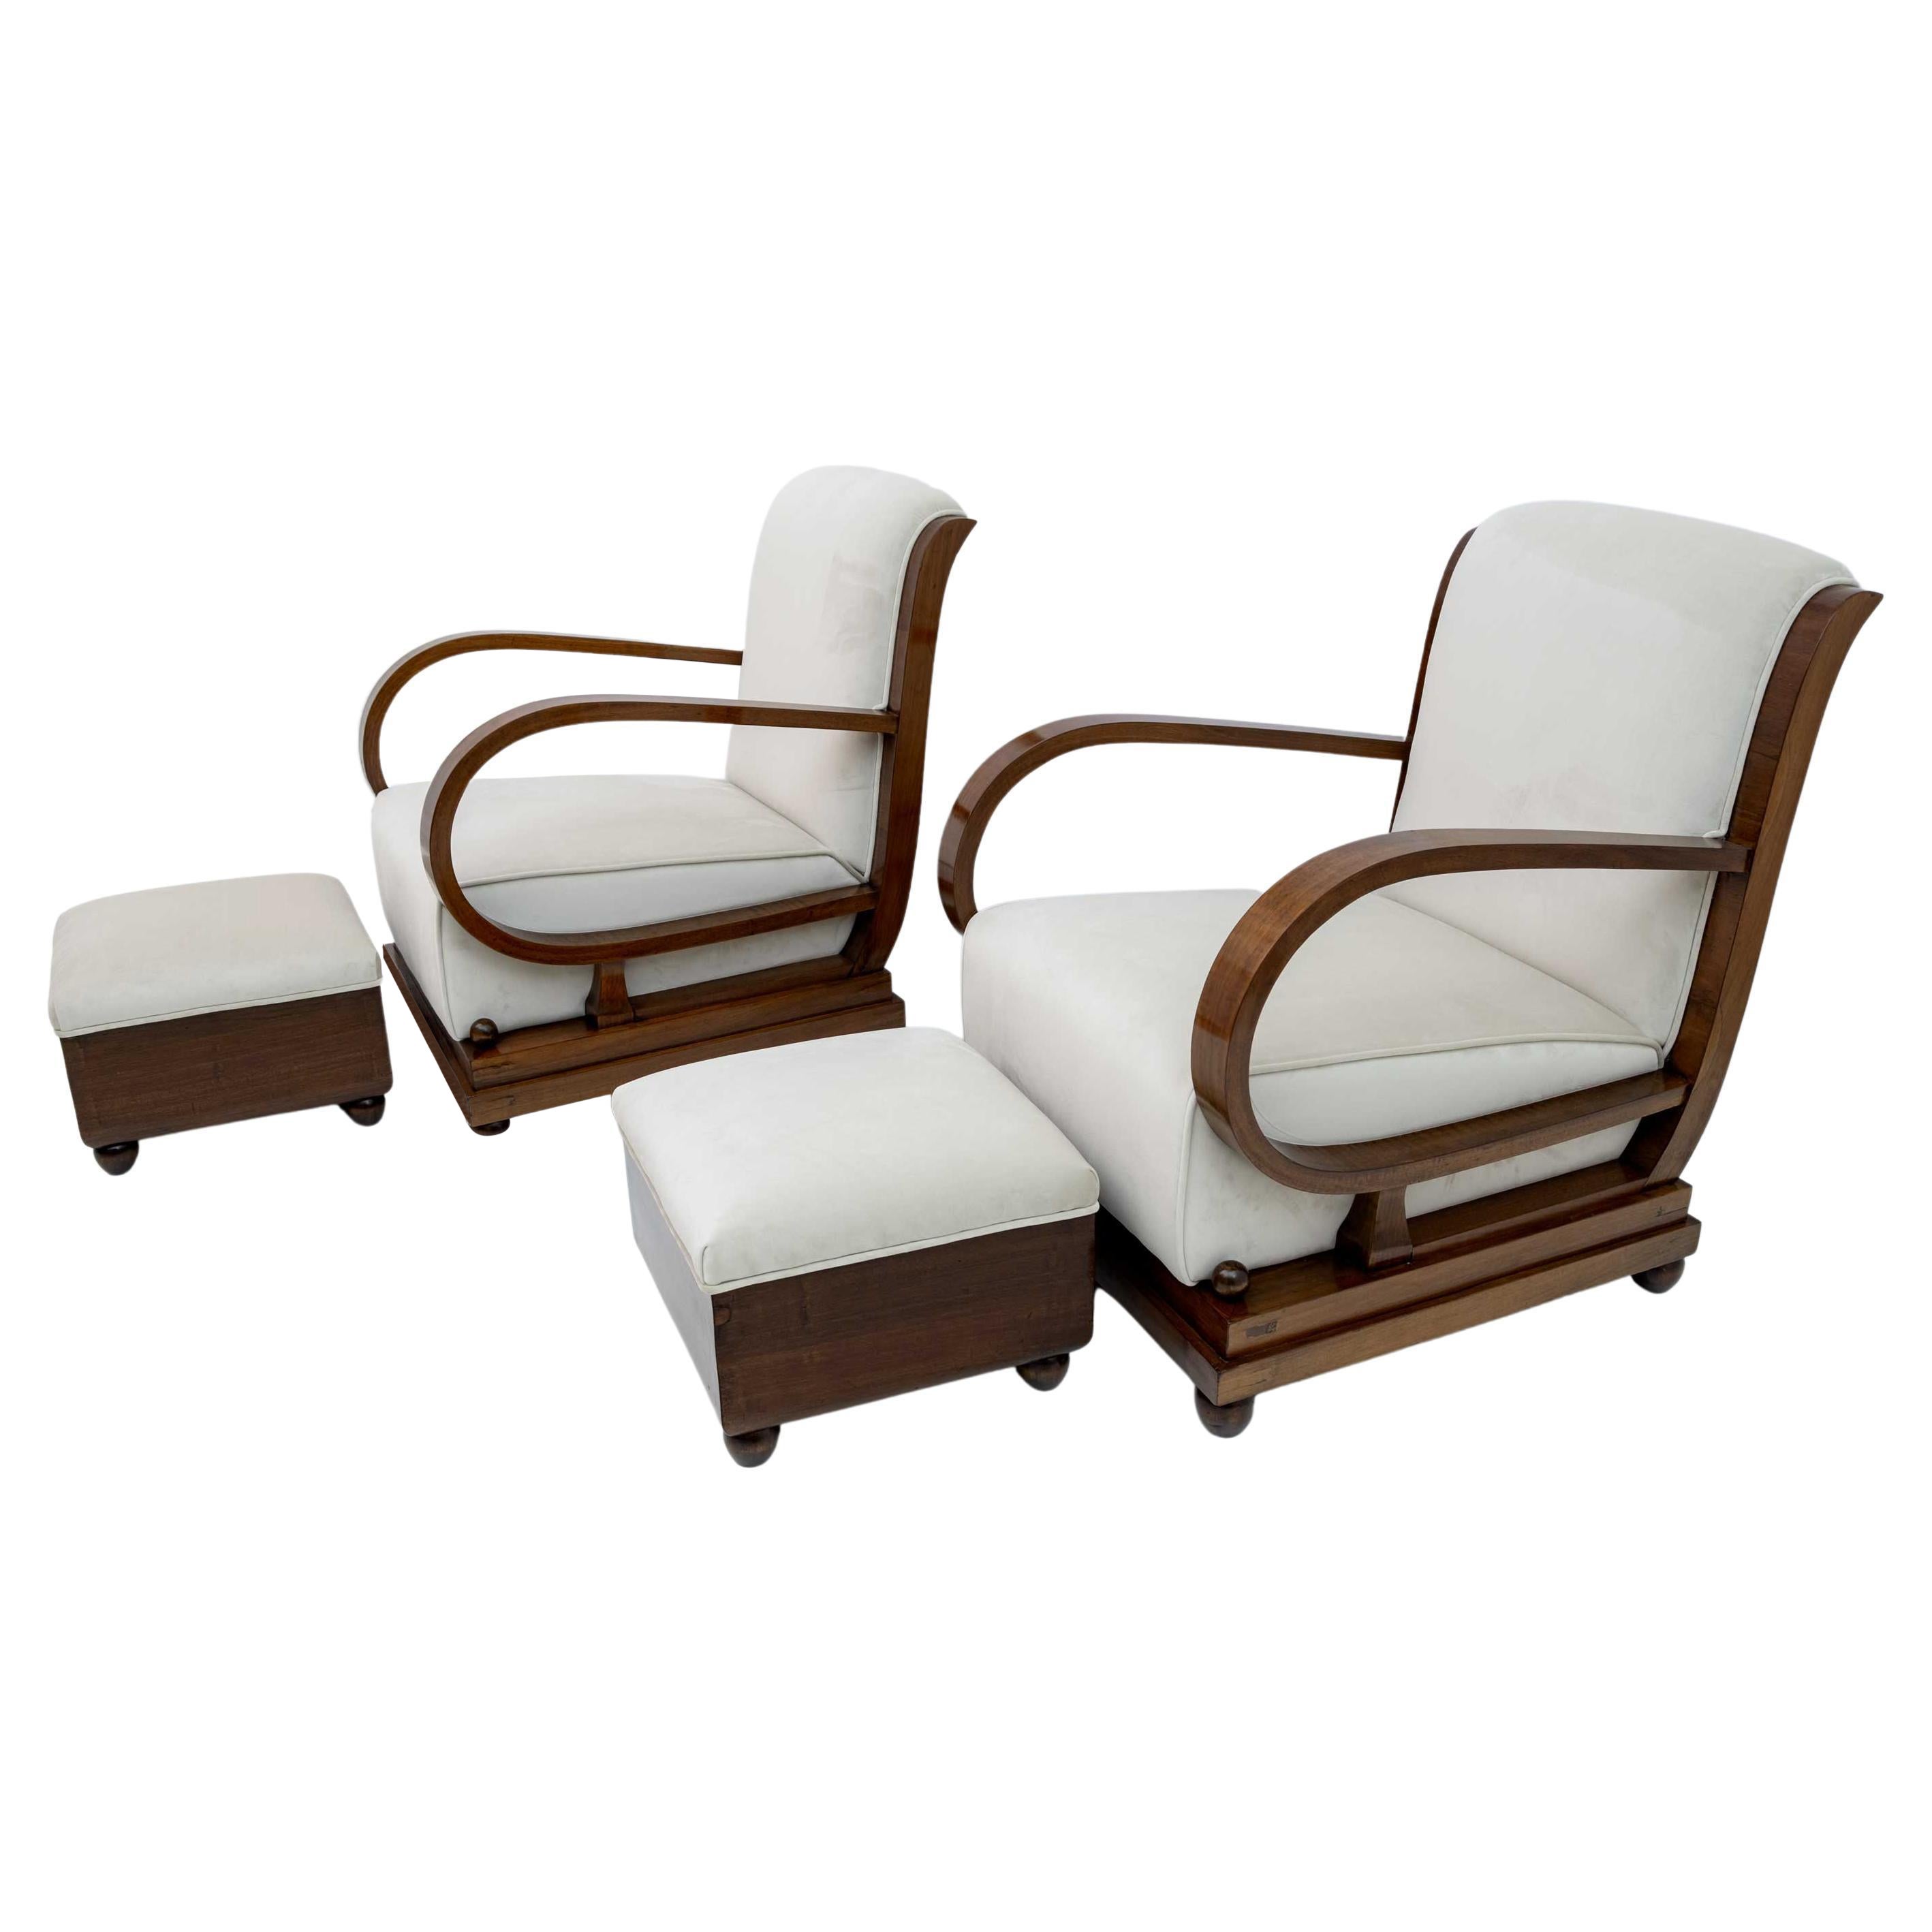 Pair of Art Dèco Italian Walnut and Velvet Armchairs and Two Ottomans, 1920s For Sale